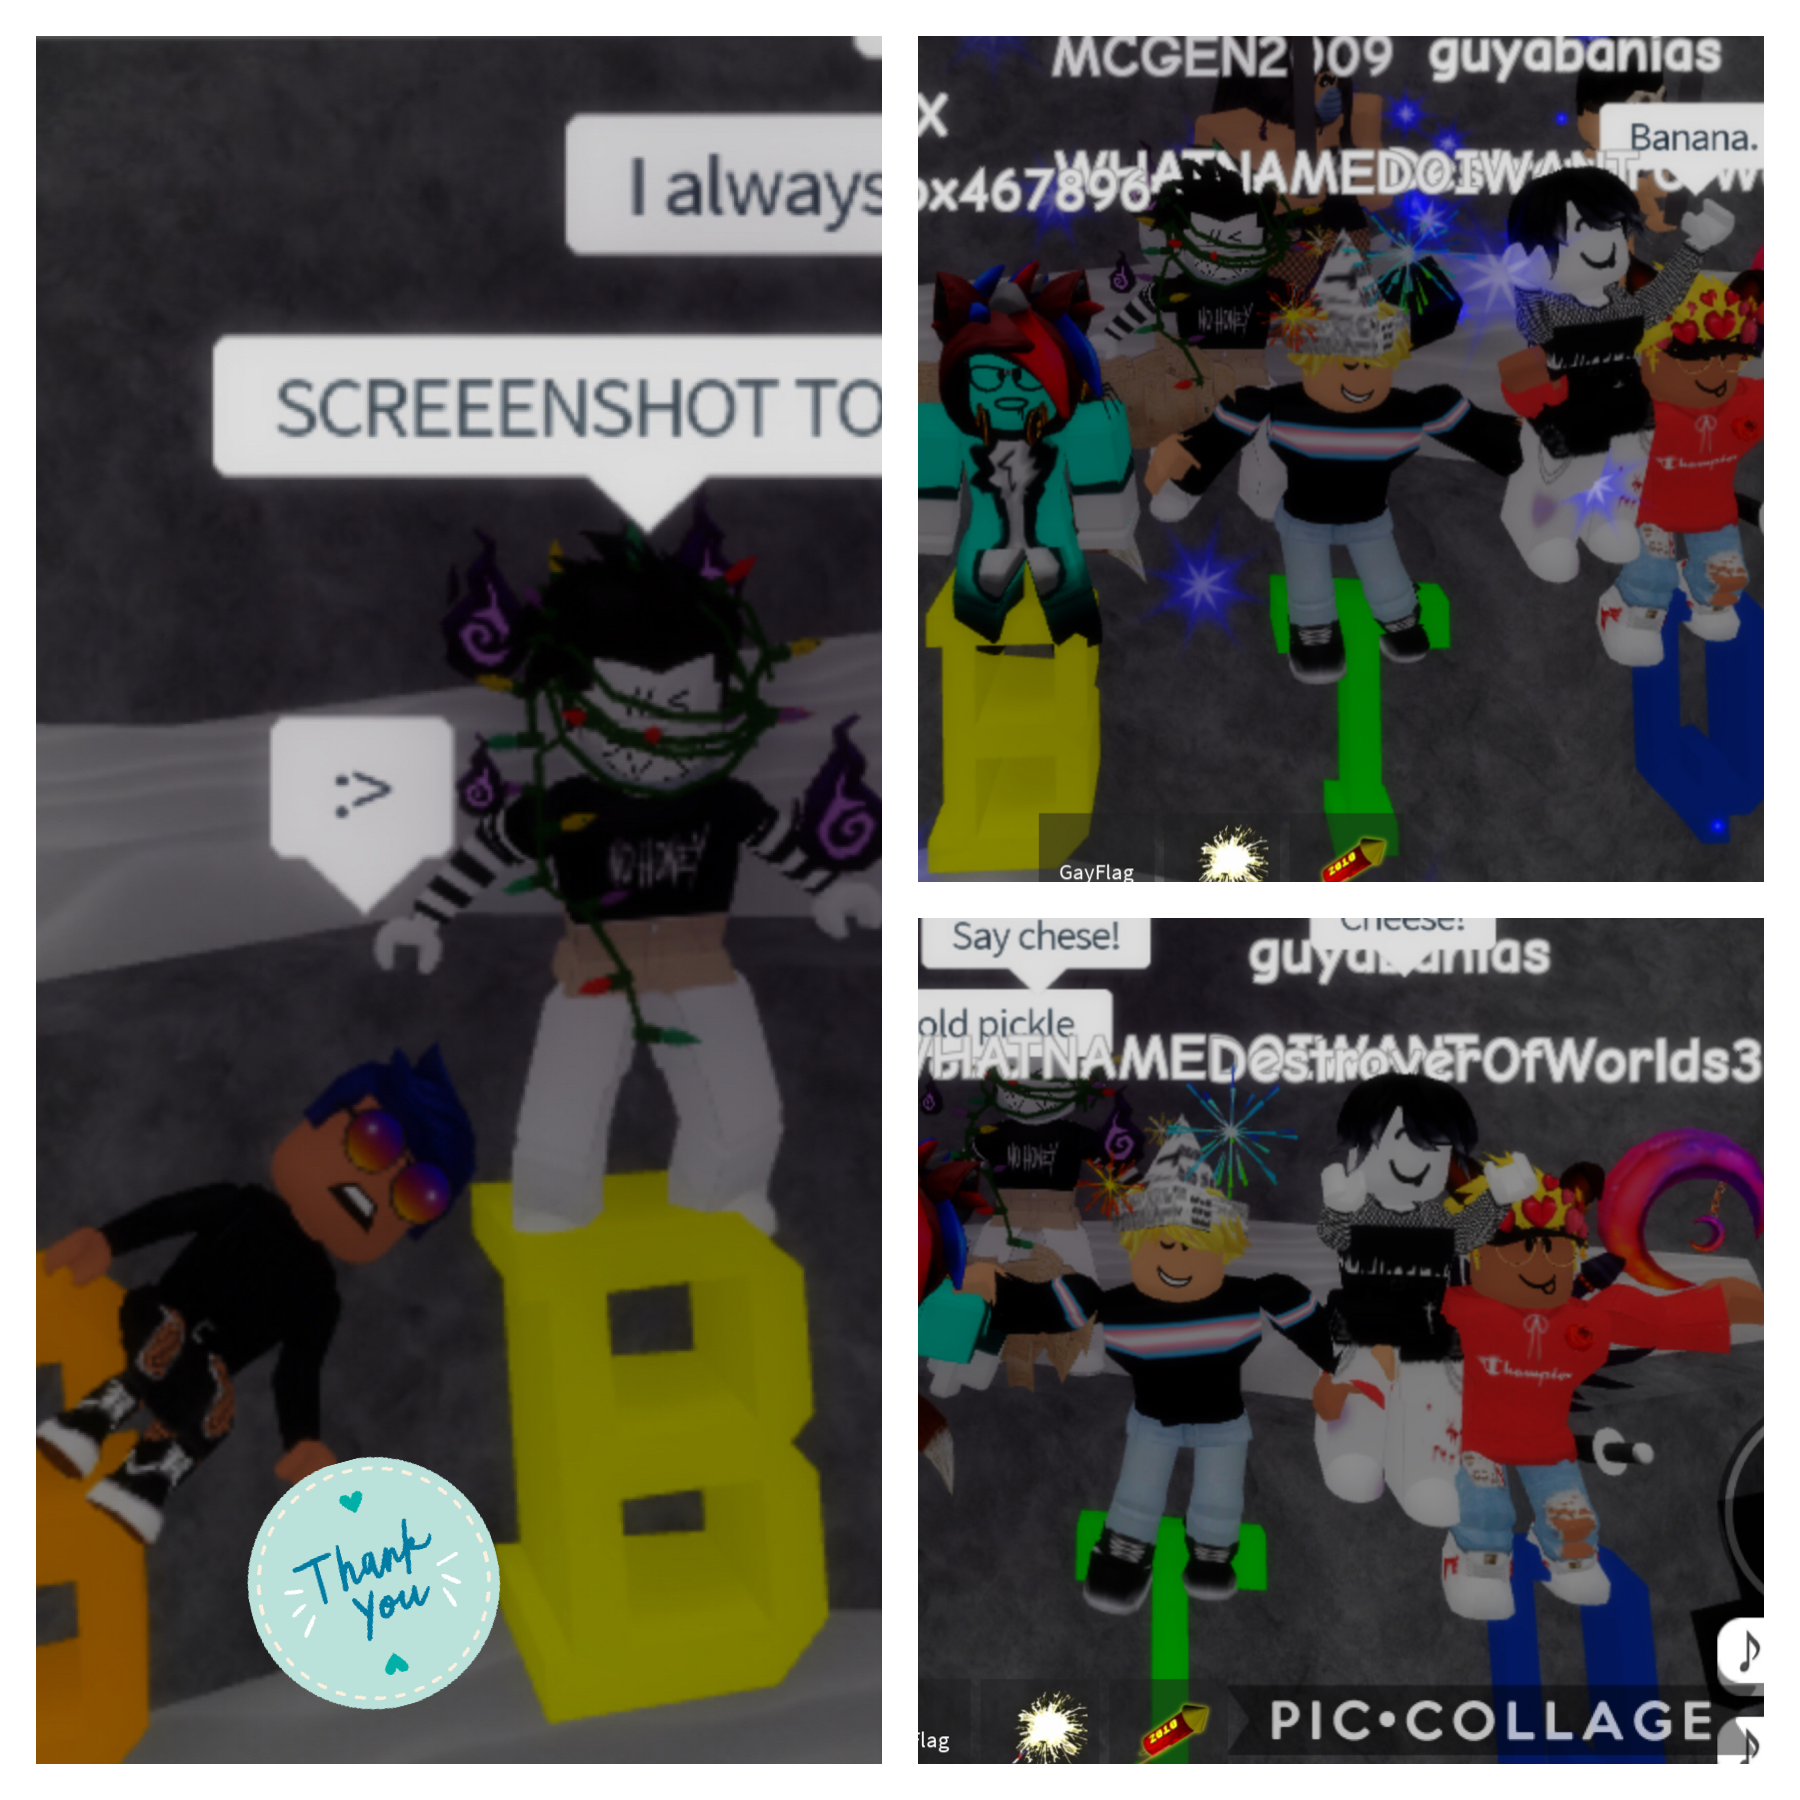 These are meh roblox friends! This game is a game for not straight peeps!:D